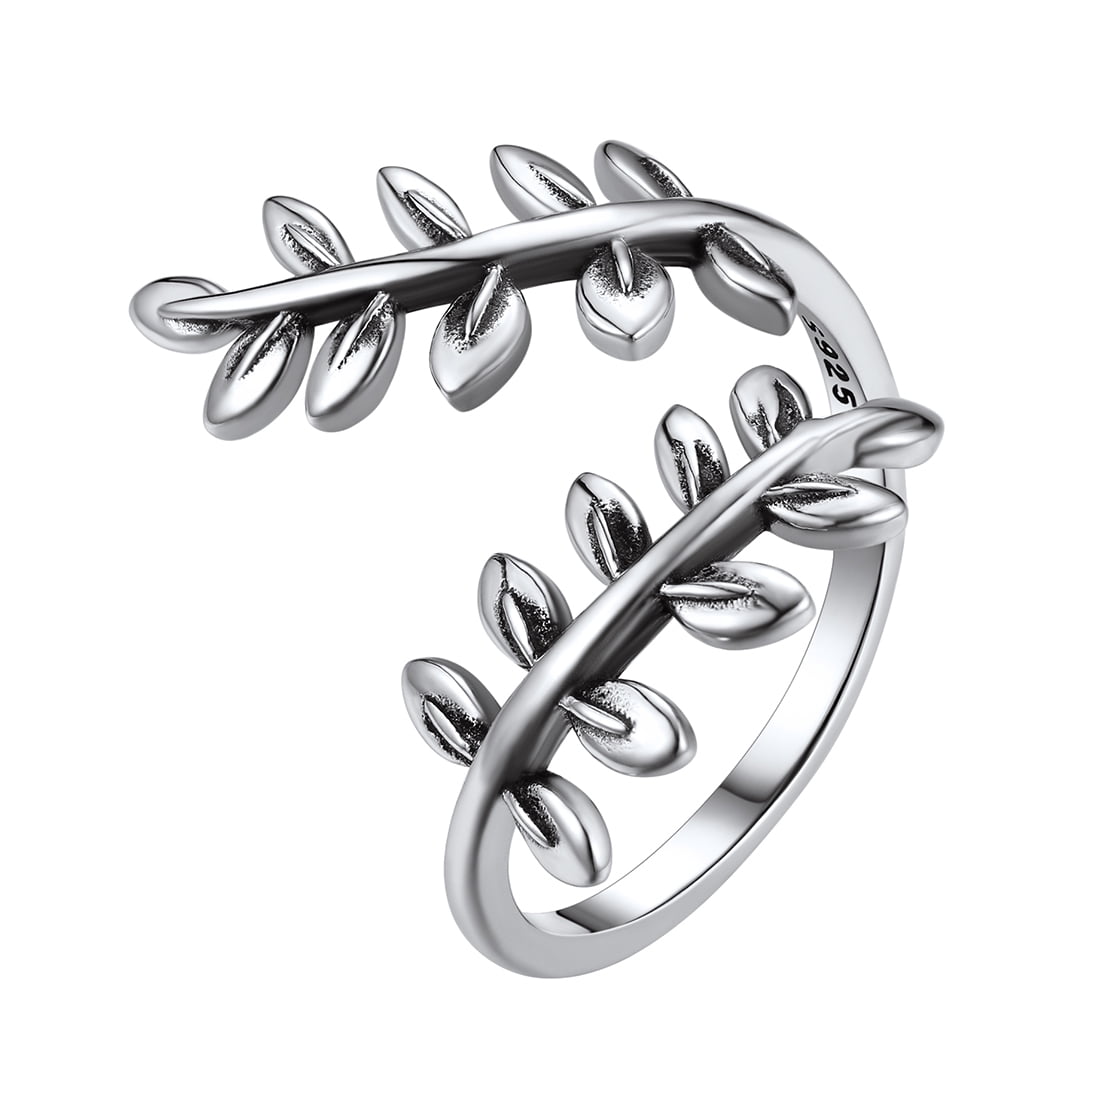 Sterling Silver Woman's Butterfly Cute Ring Wholesale 925 Band 19mm Sizes 5-12